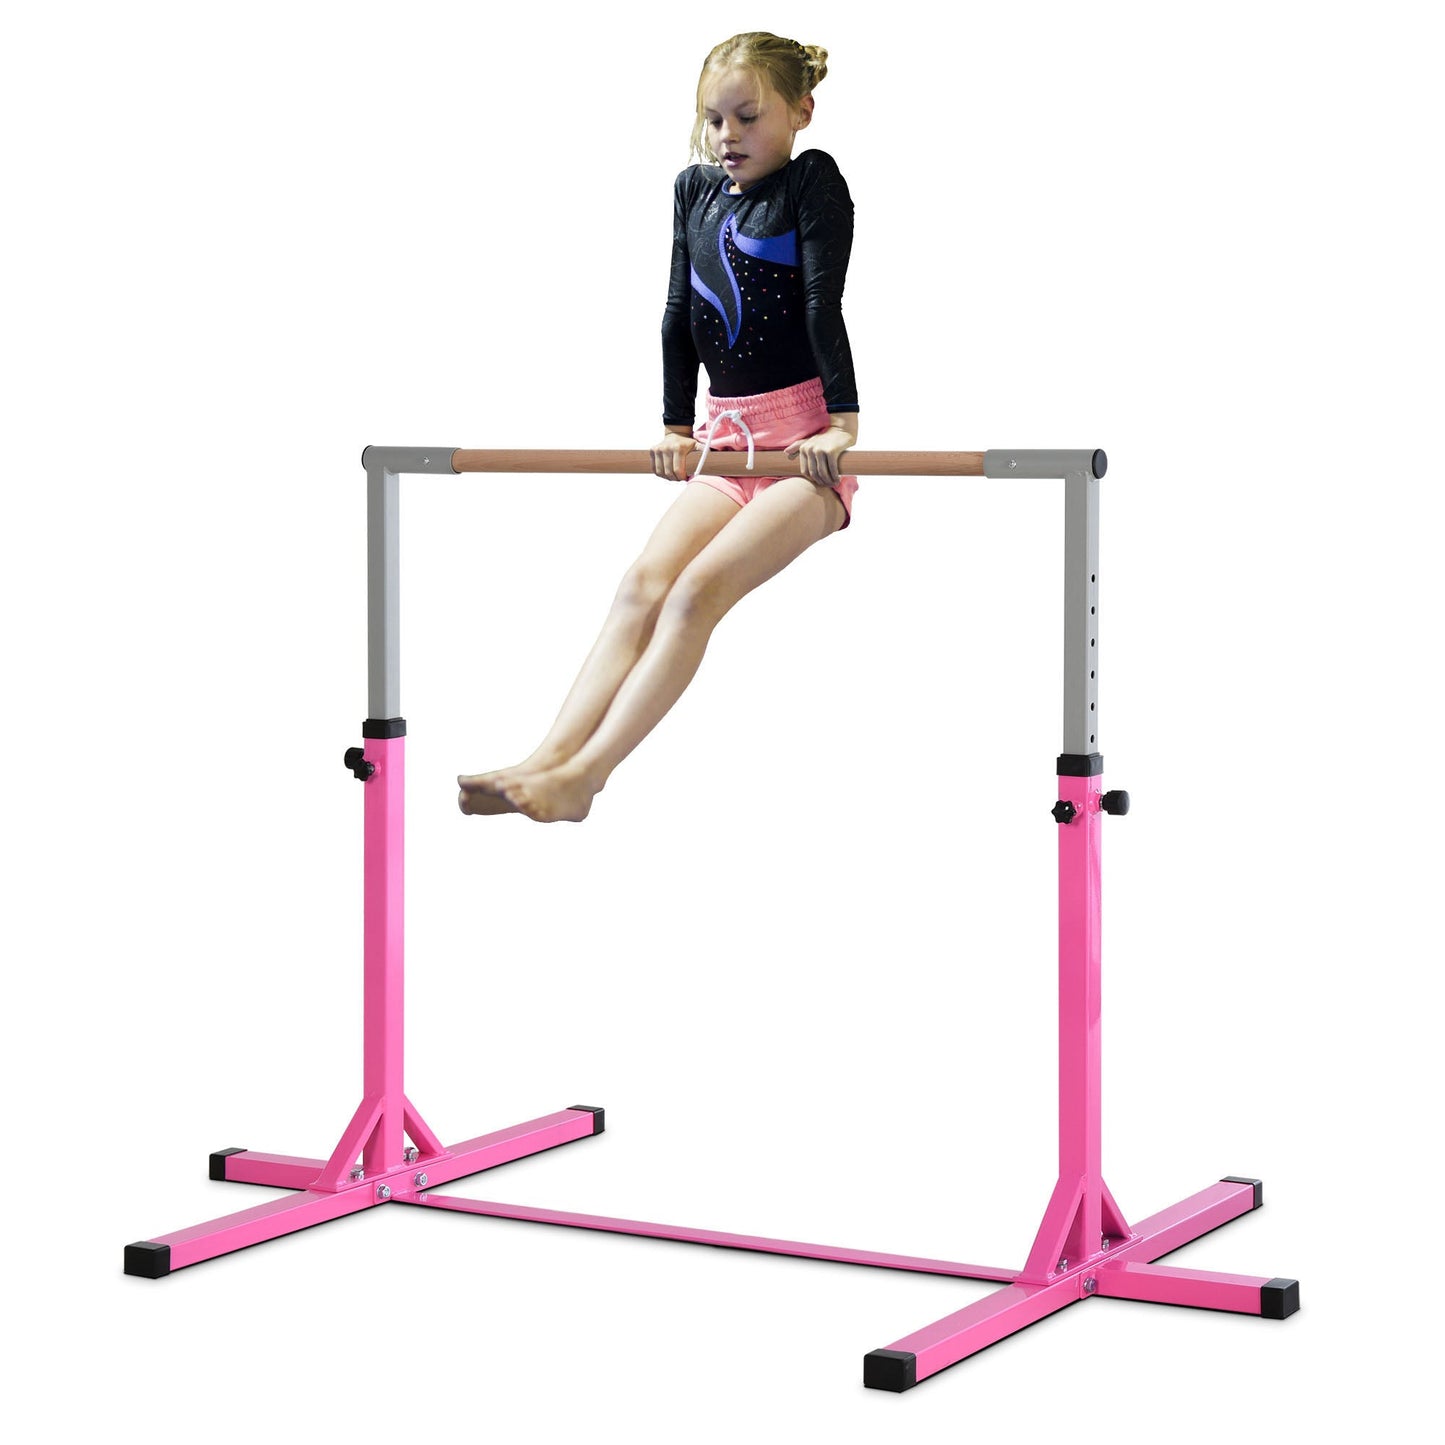 Professional Gymnastics Bar for Kids, Toddler Home Gymnastics Equipment with 13-level Adjustable Height, Gym Fitness with Steel Frame at Gallery Canada